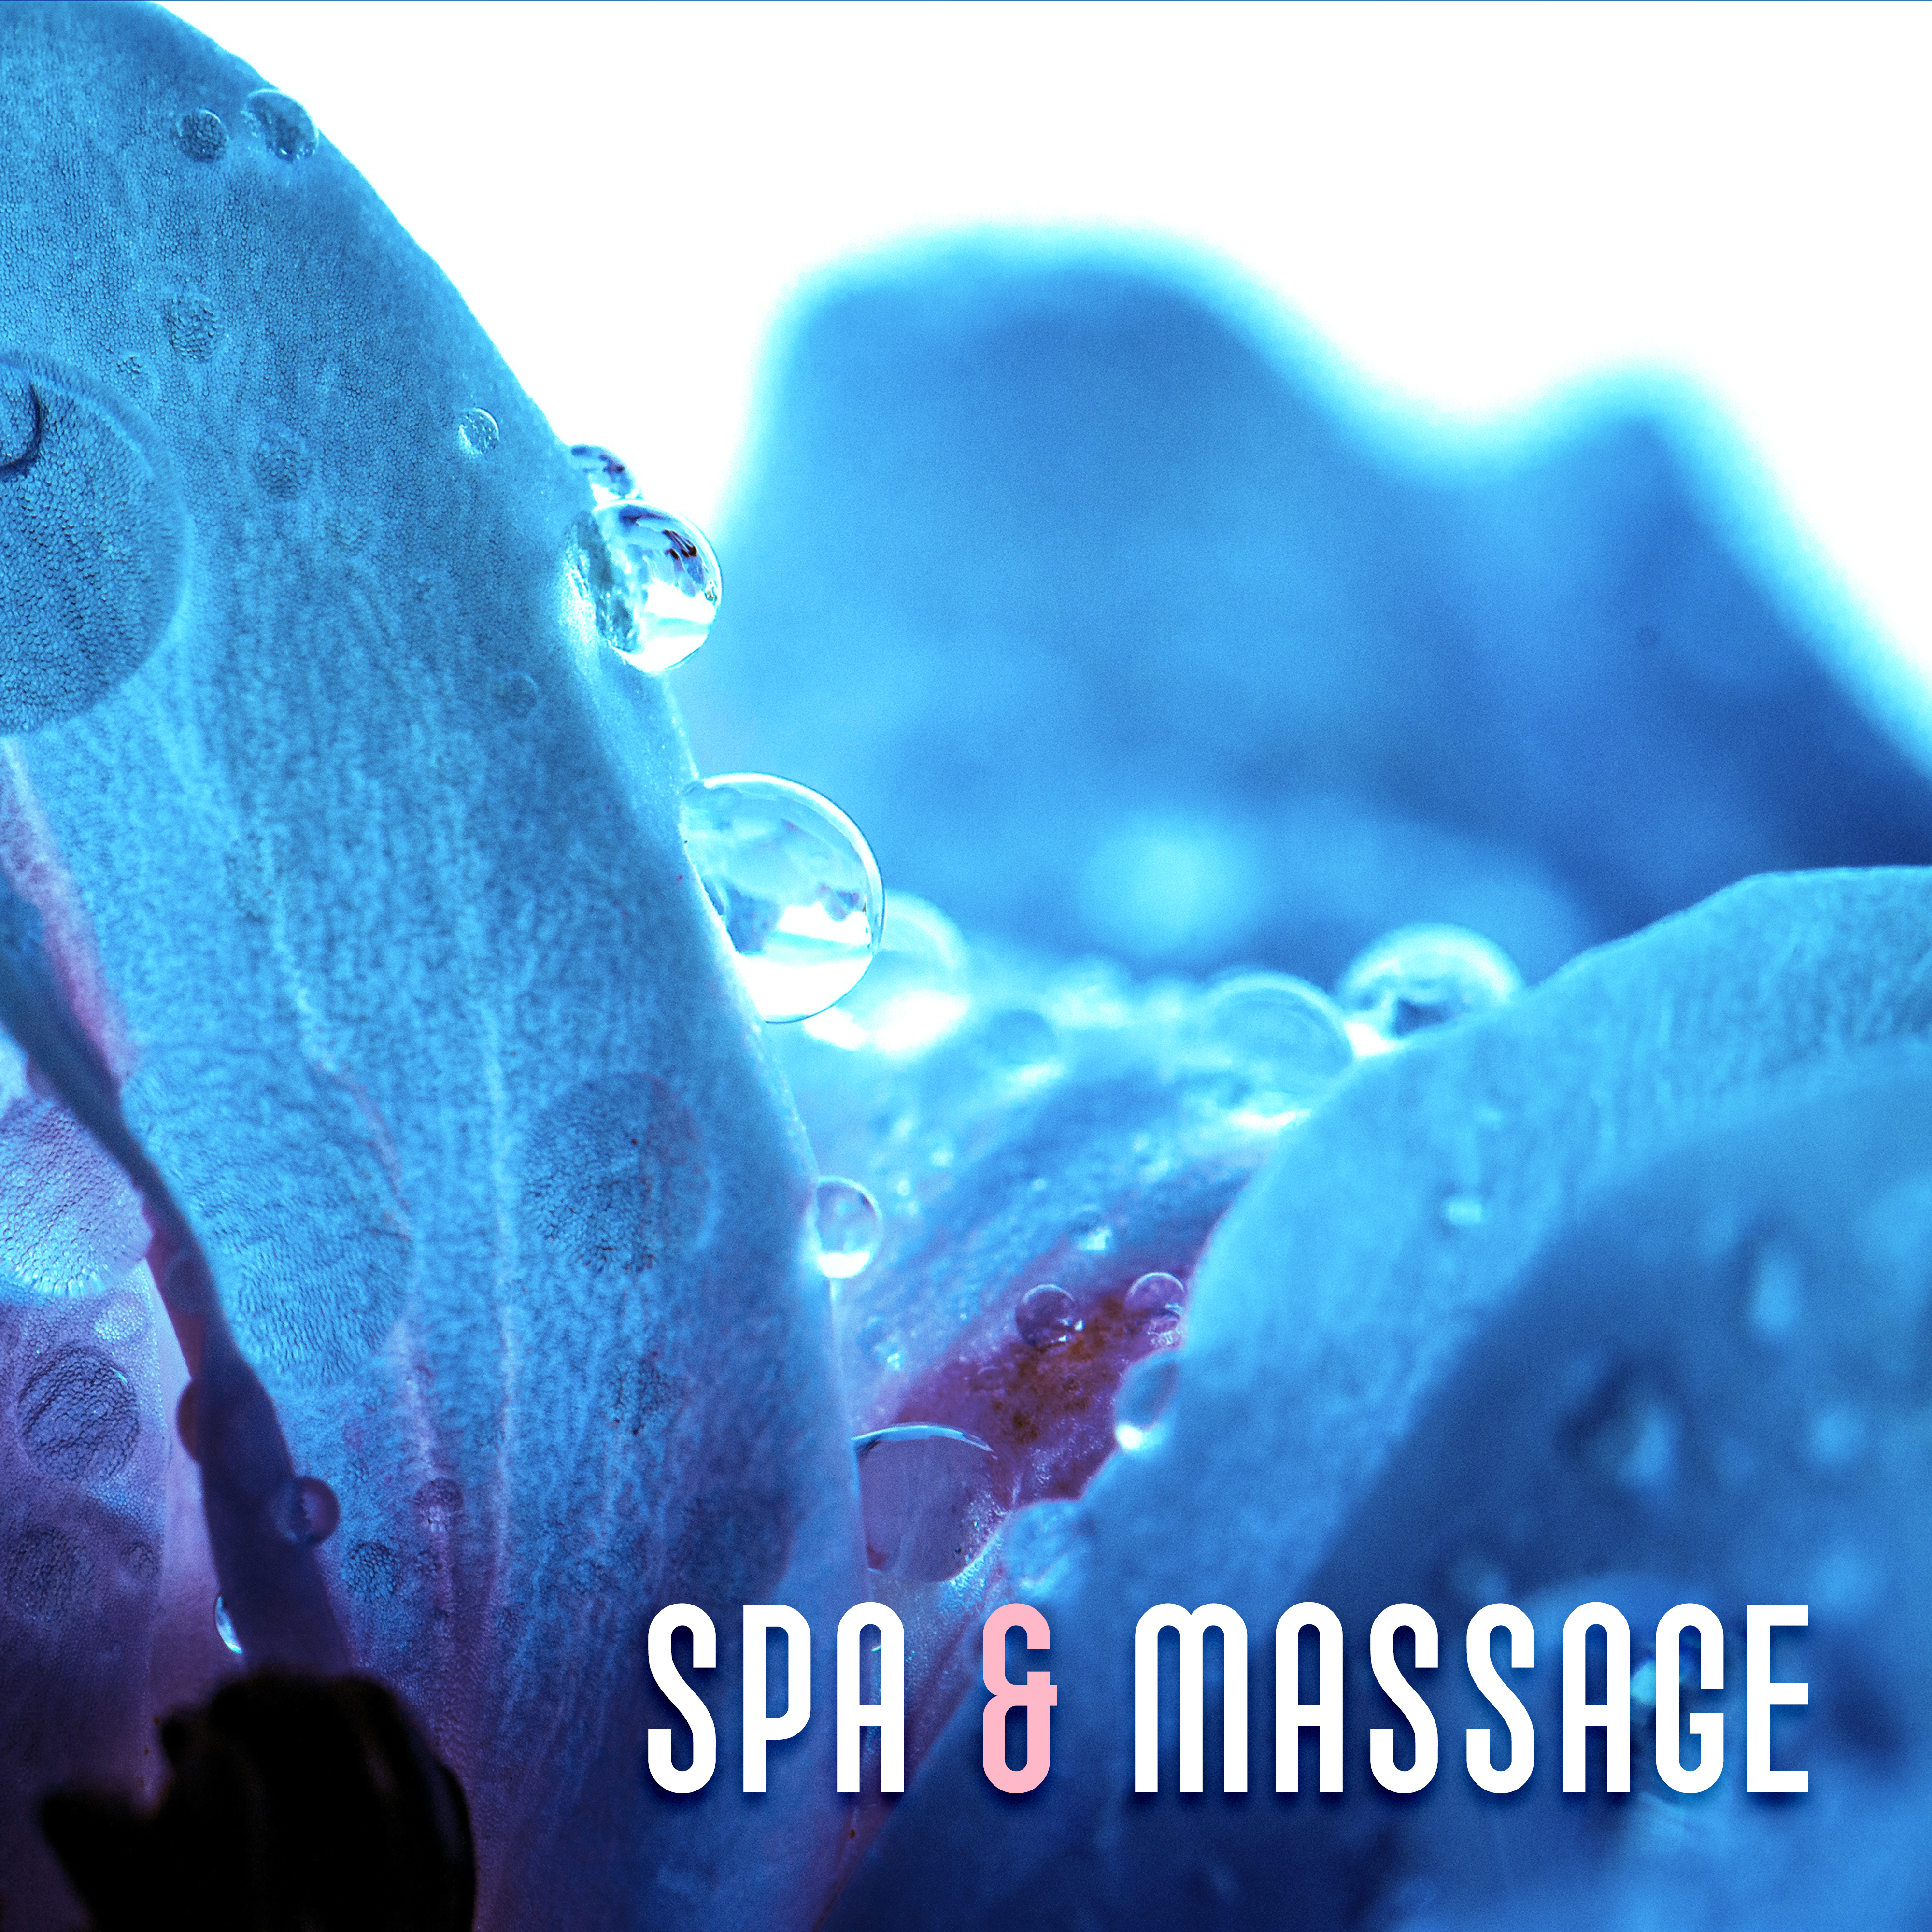 Spa & Massage – Music for Relaxation, Stress Free, Meditation Music, Wellness, Spa Dreams, Nature Sounds, Relief